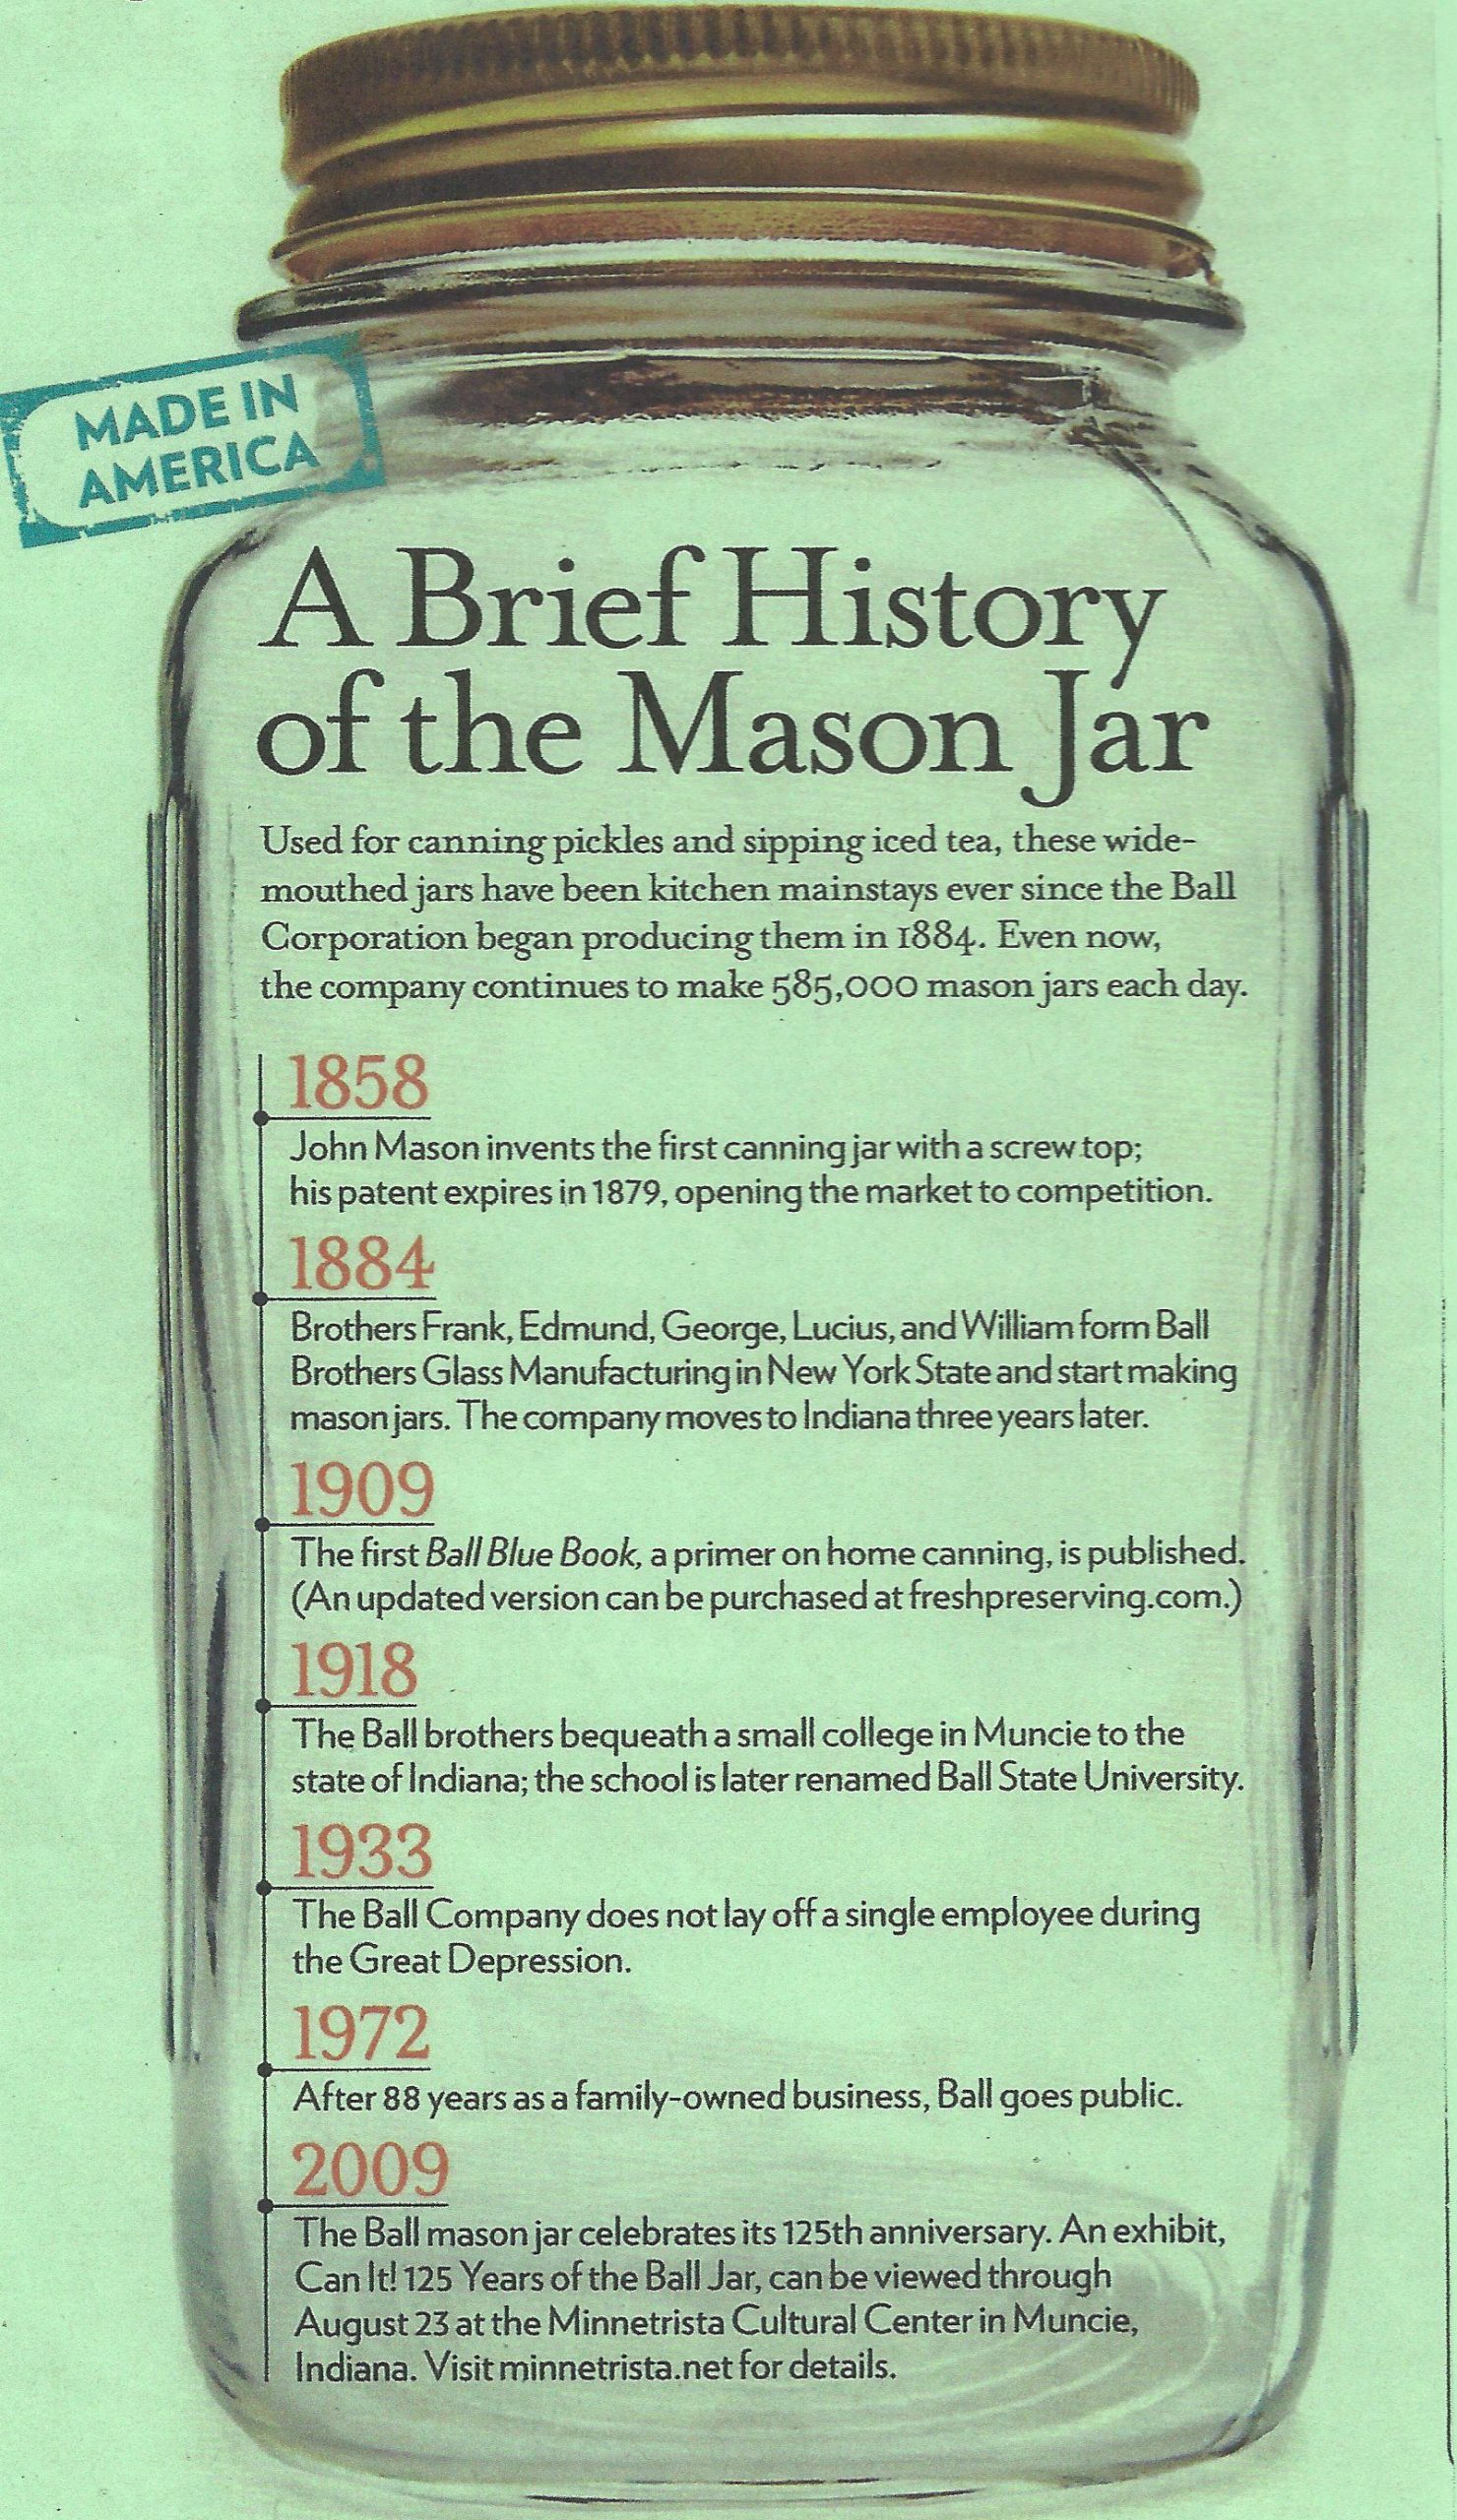 a-brief-history-of-ball-mason-jars-and-their-uses-myco-supply